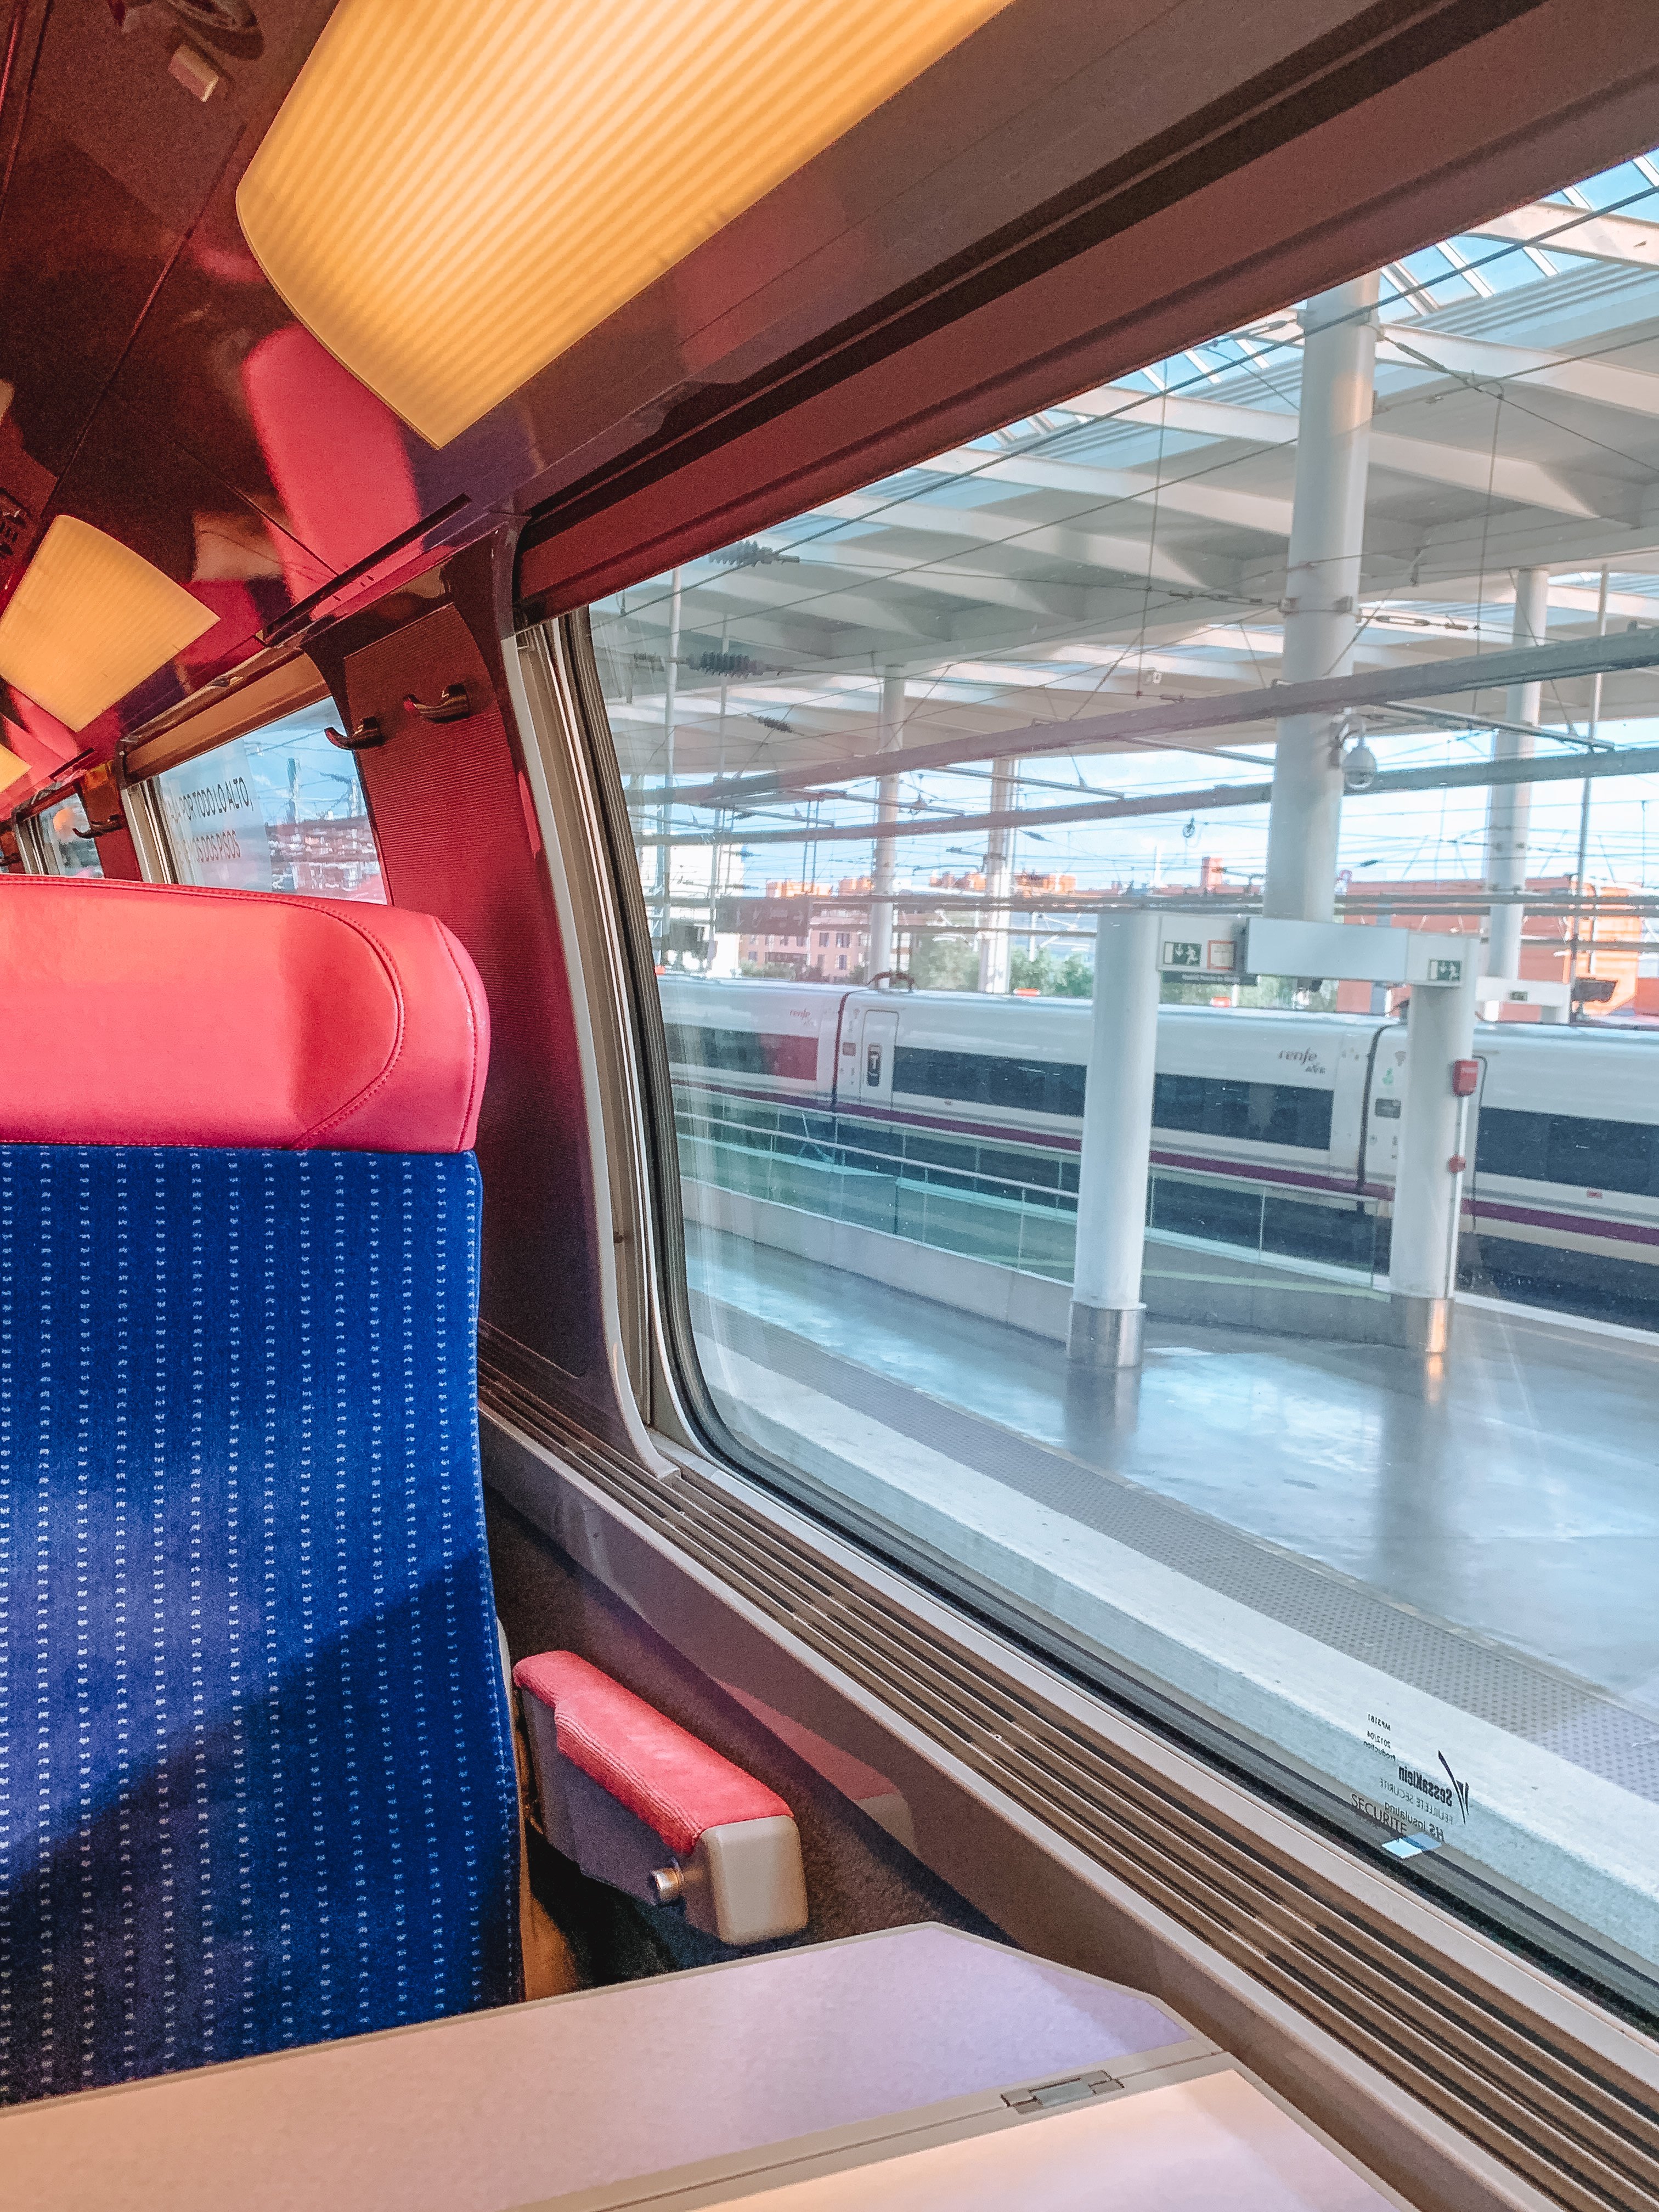 Go from Madrid to Barcelona for only 9€ with the new OUIGO trains